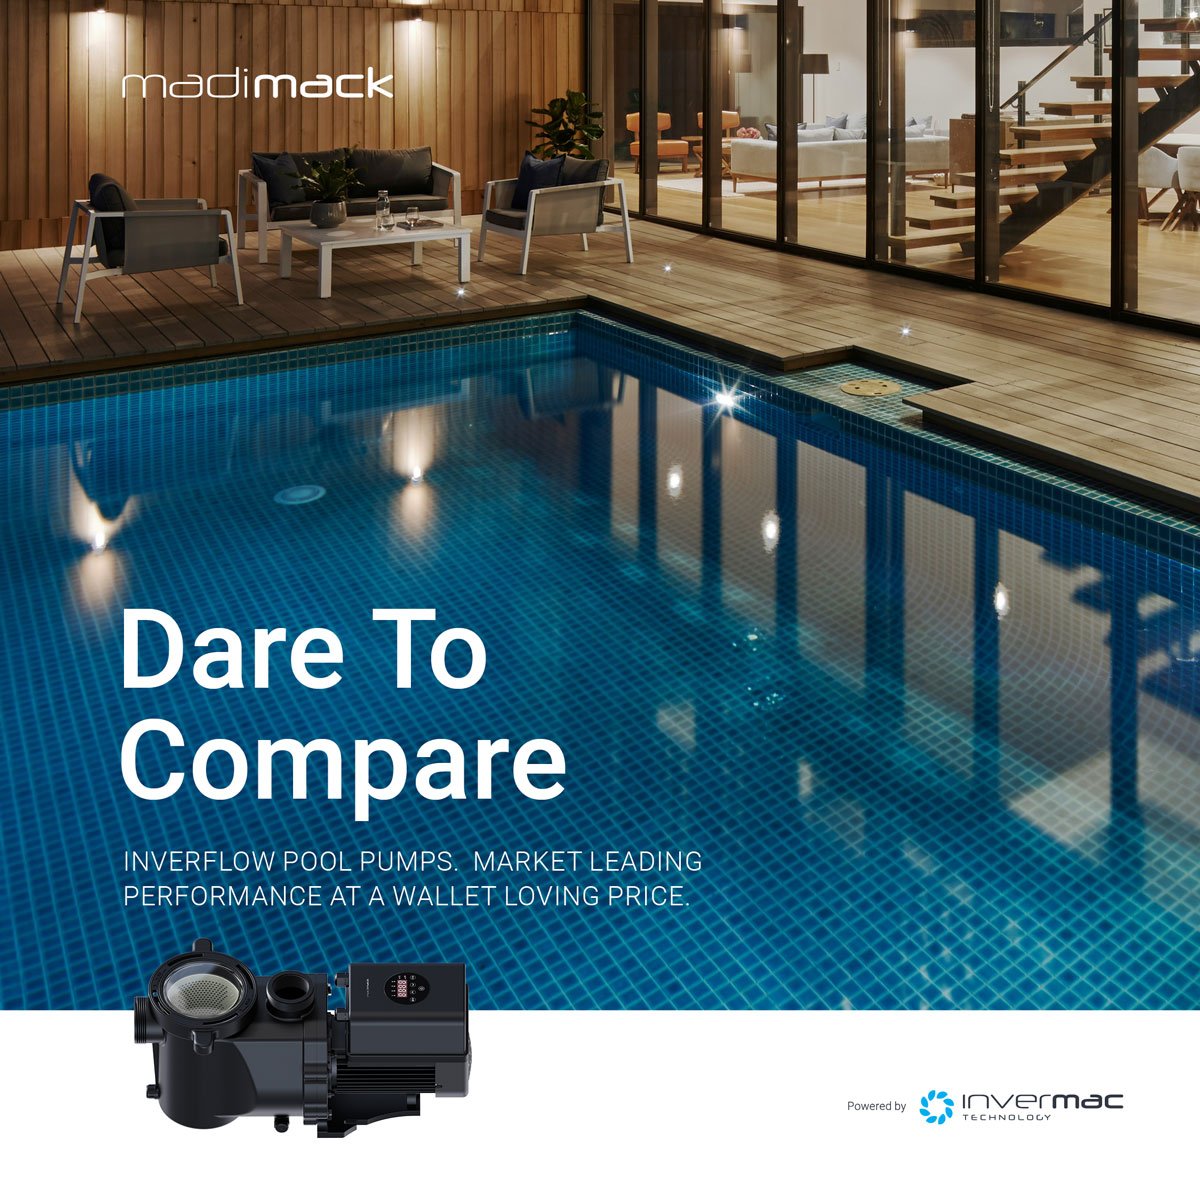 Madimack-Socmed-Collaterals_HEATING-and-Pool-Pump2